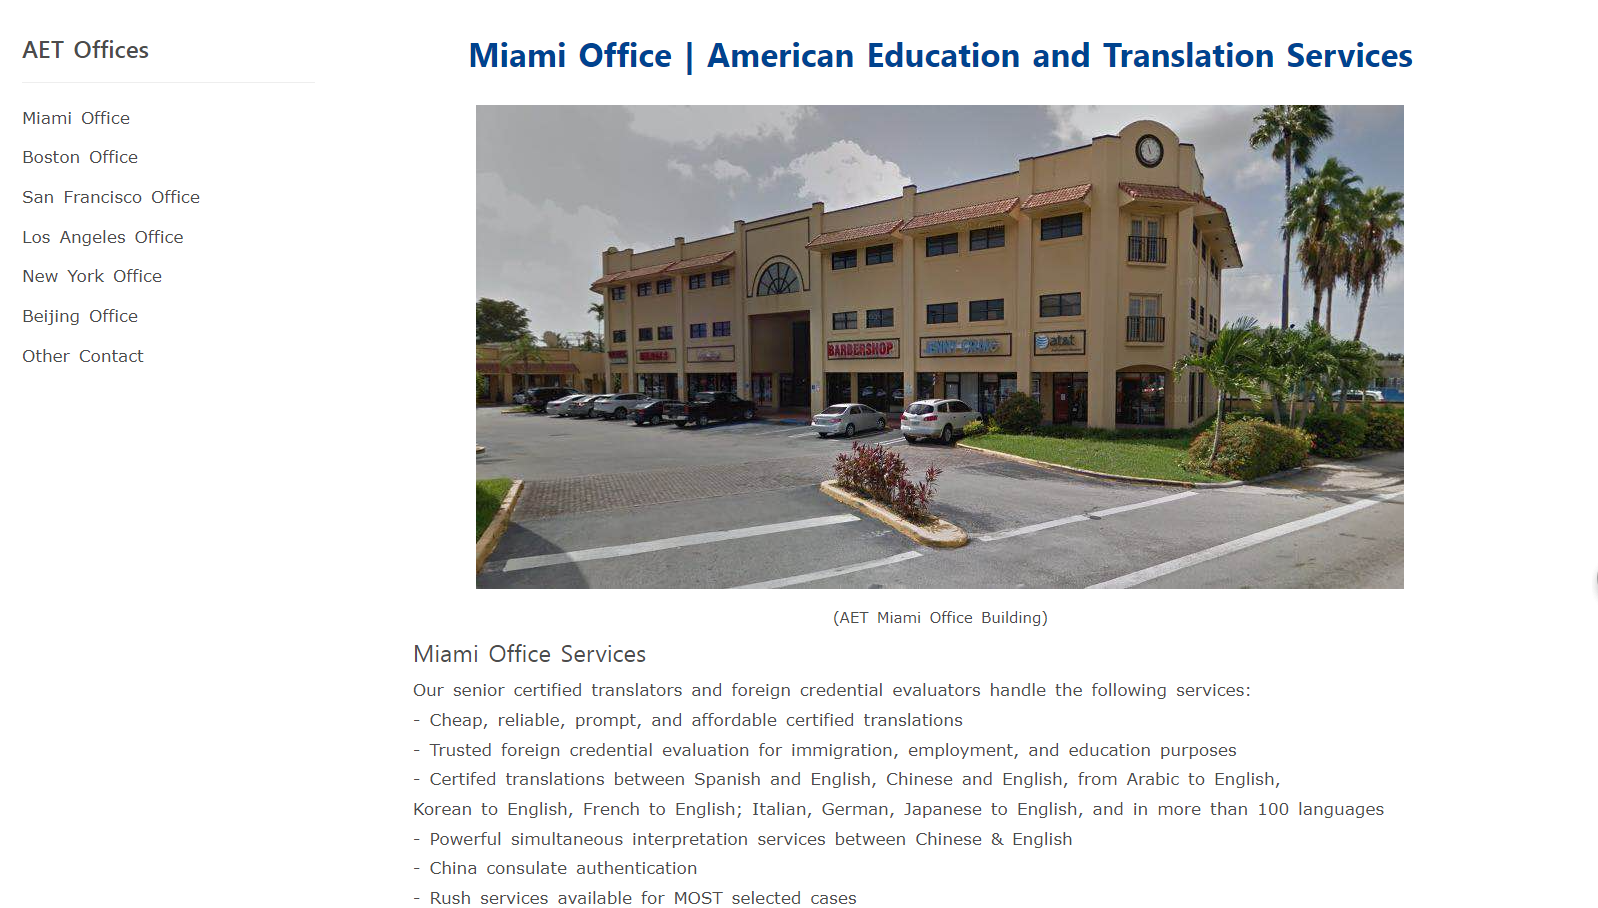 American Education & Translation Services, Corp. (AET)